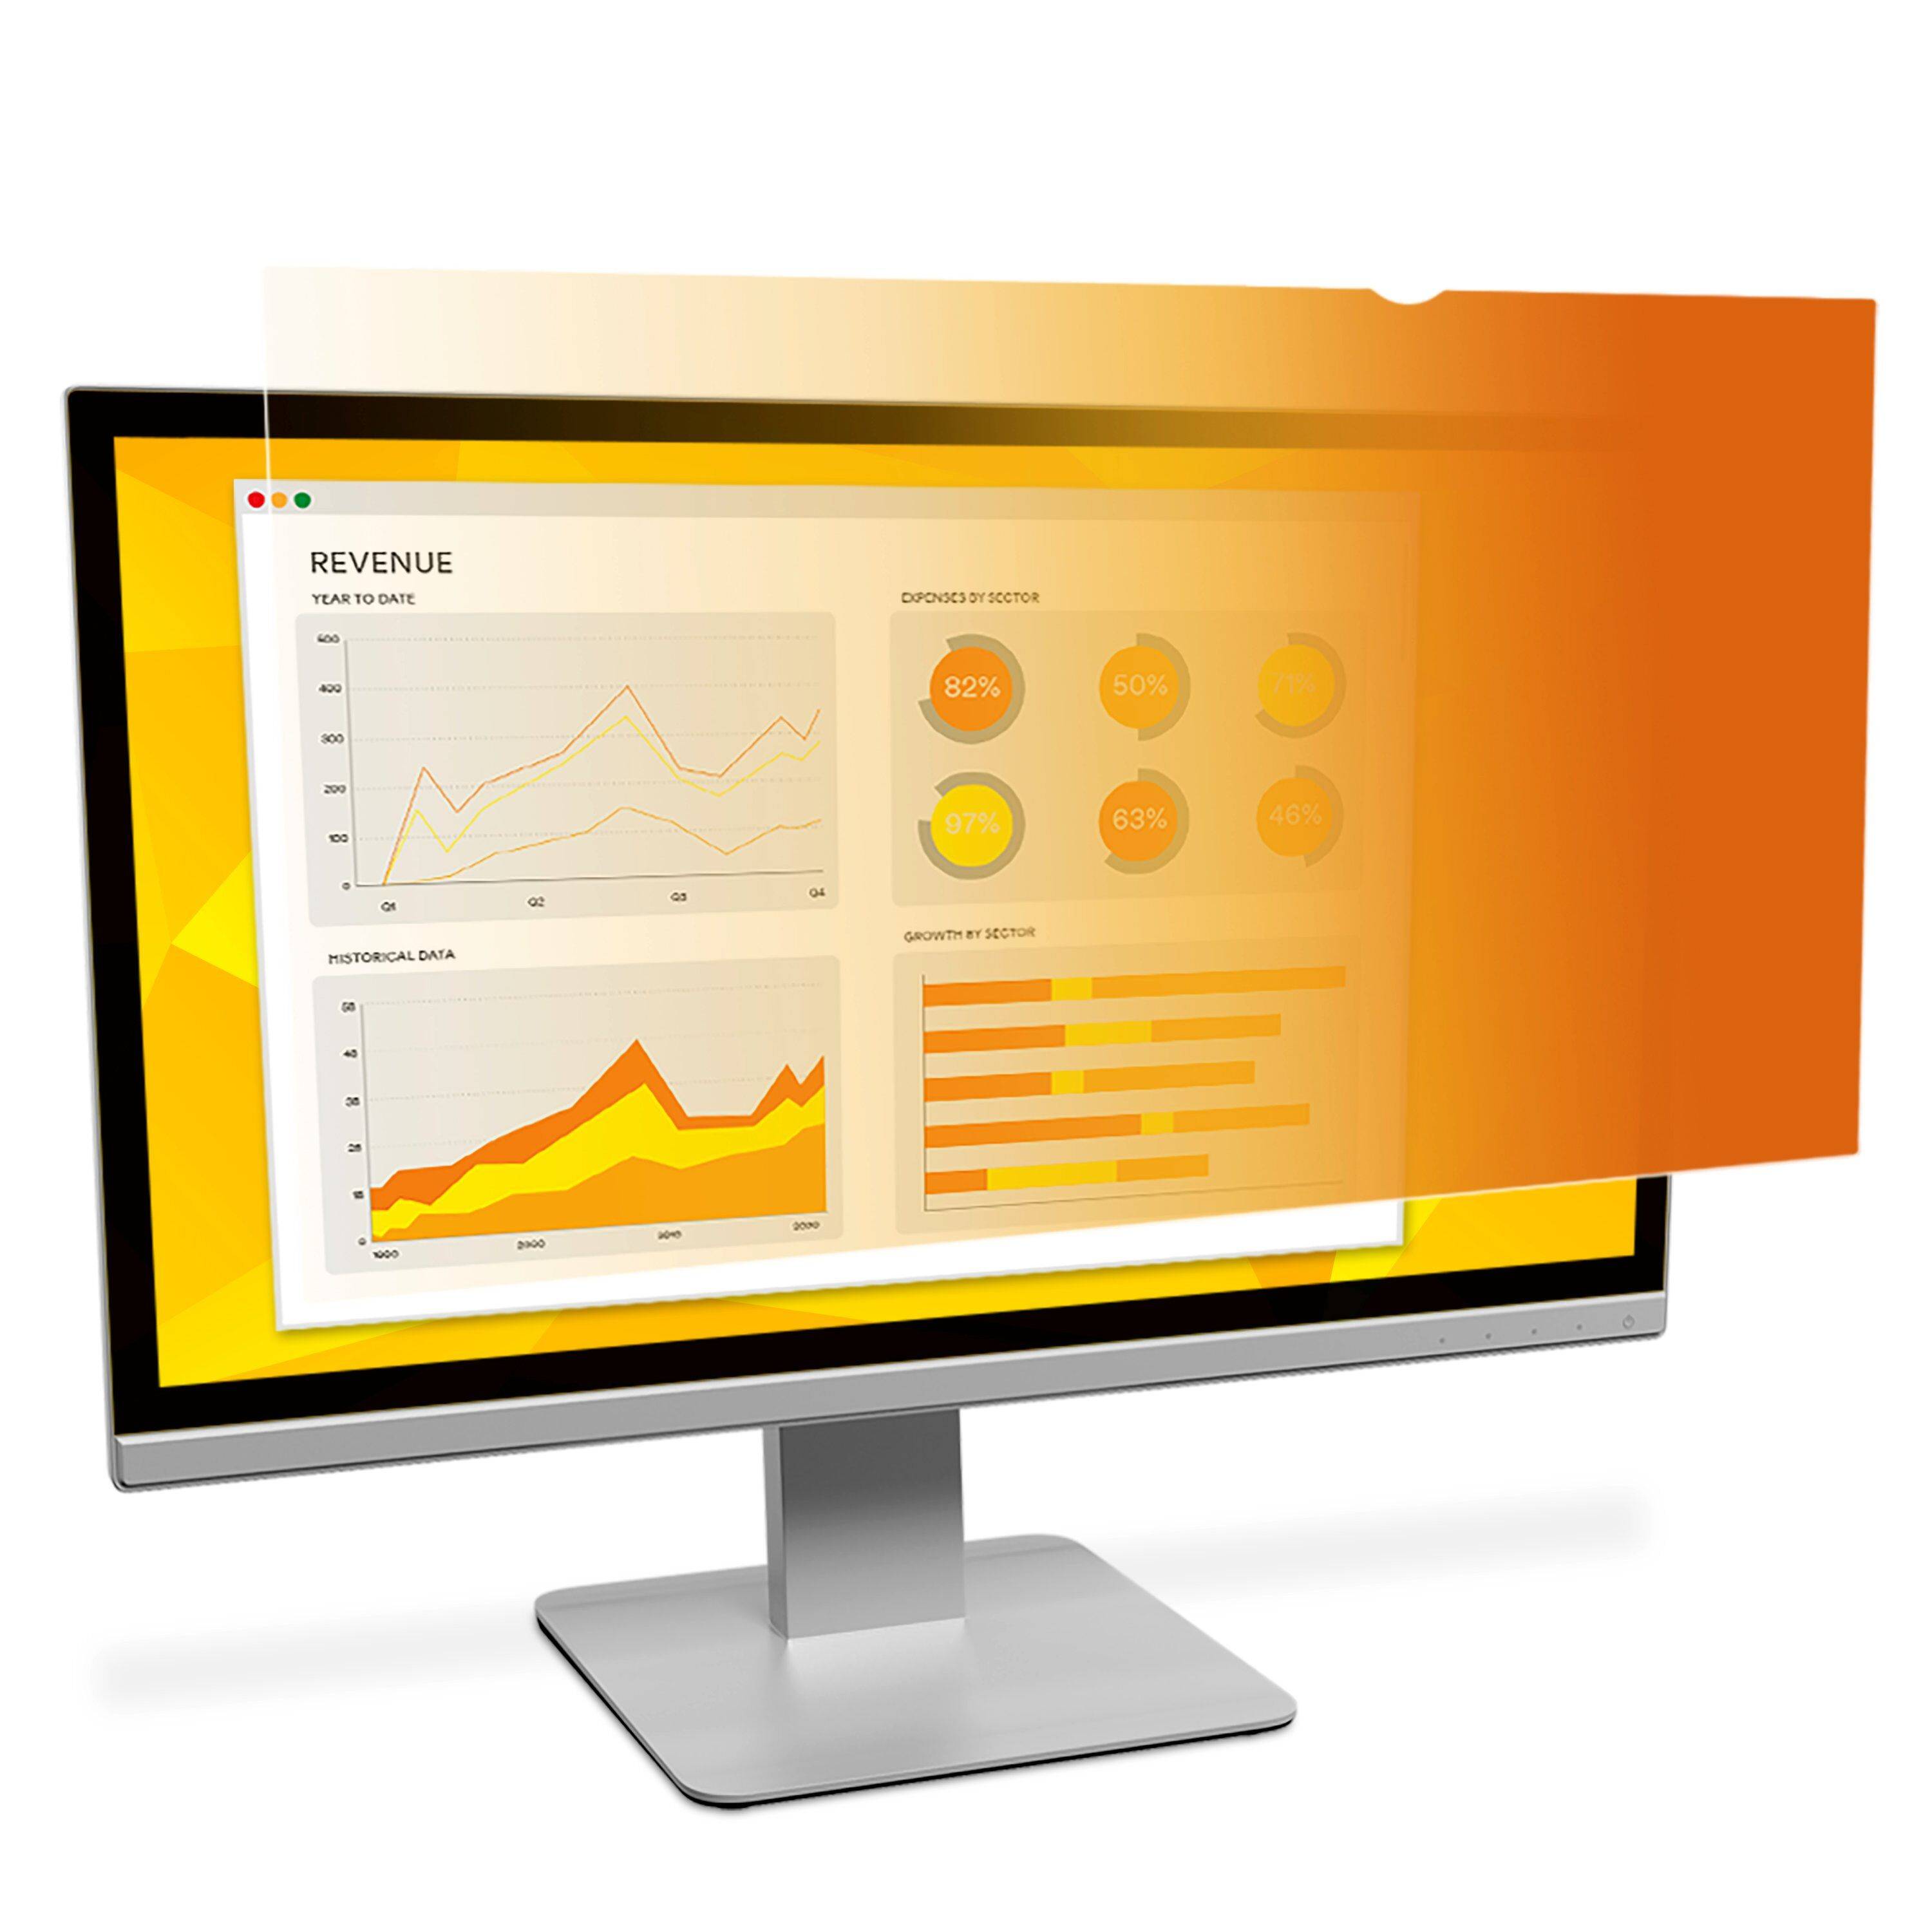 Rca Informatique - image du produit : GOLD PRIVACY FILTER FOR 23.8IN WIDESCREEN MONITOR